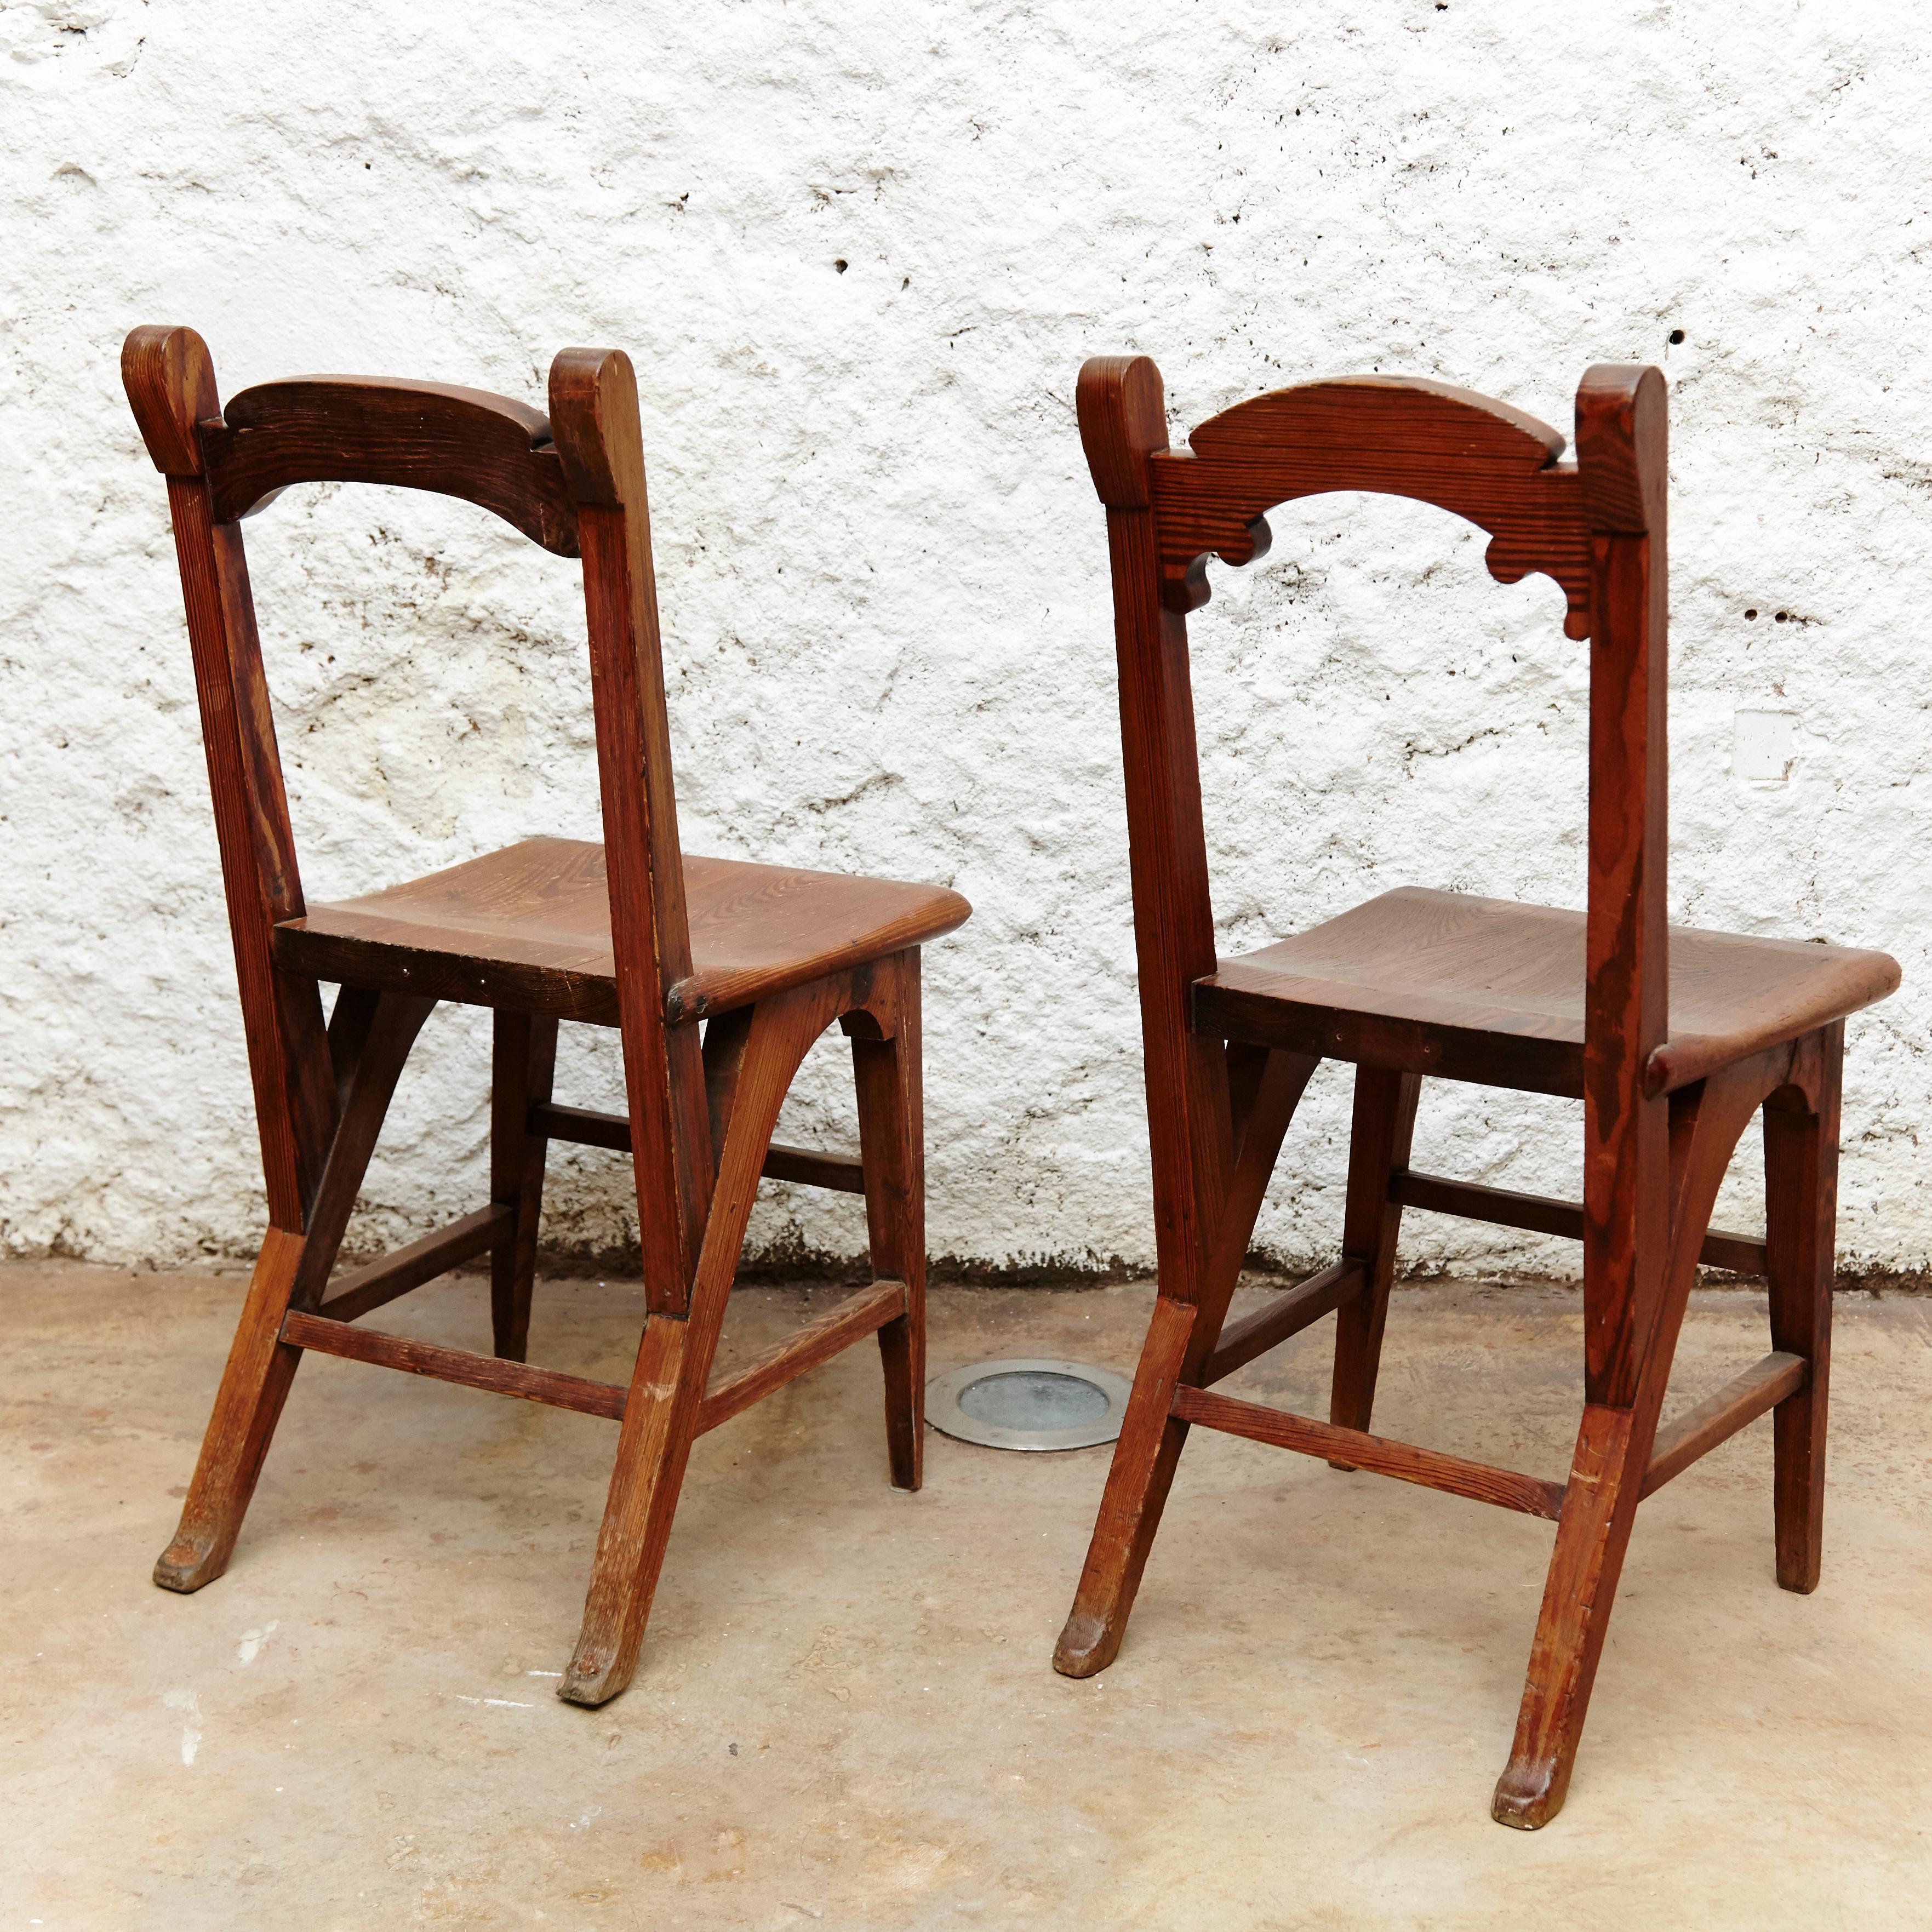 Arts and Crafts Pair of Catalan Modernist Wooden Chairs, circa 1920